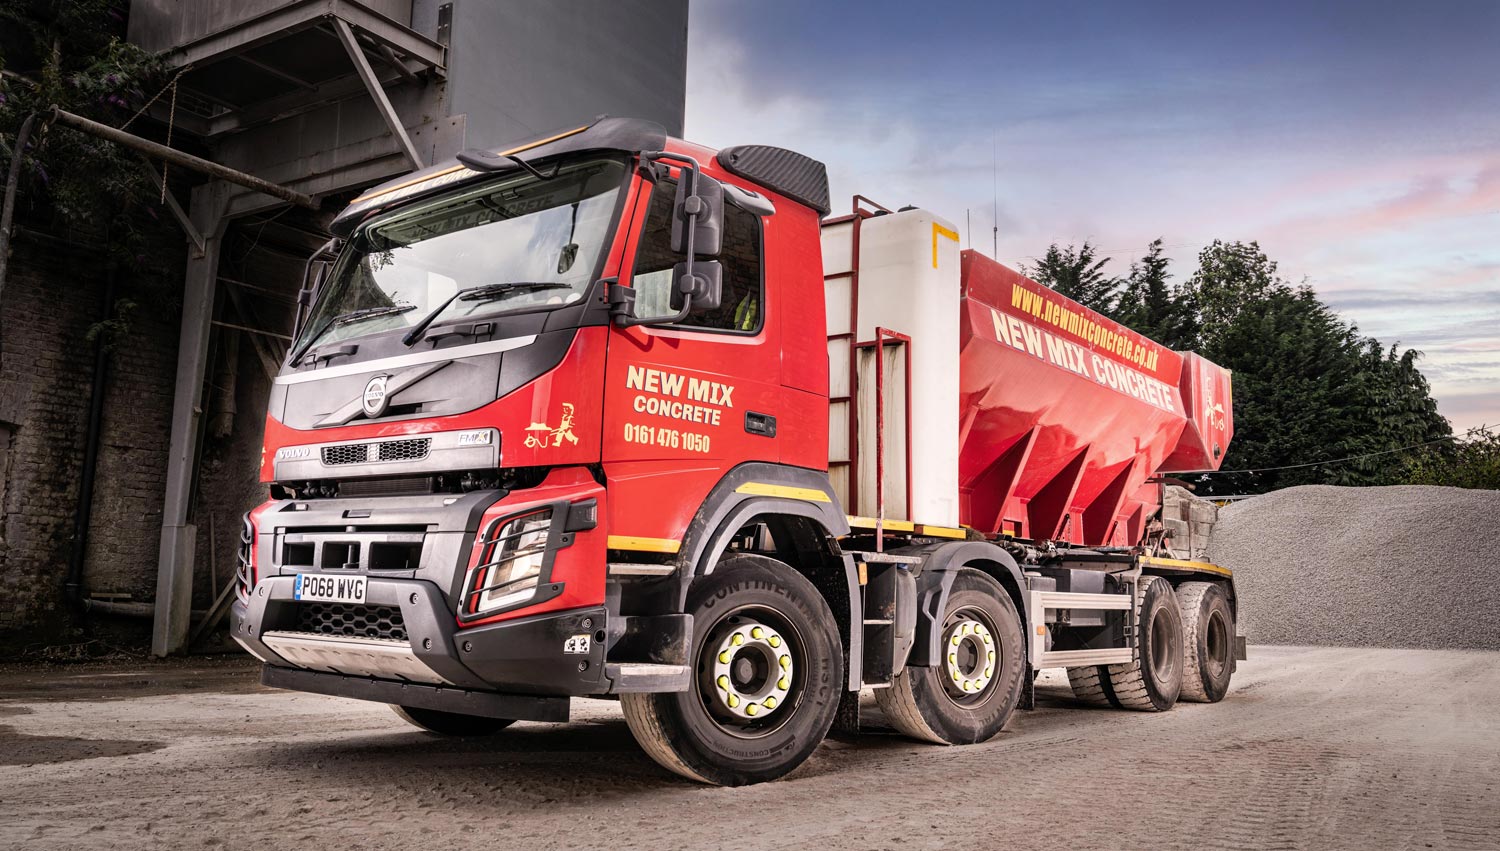 New Mix - reliable ready mix concrete supplier for Manchester, Stockport and Leeds